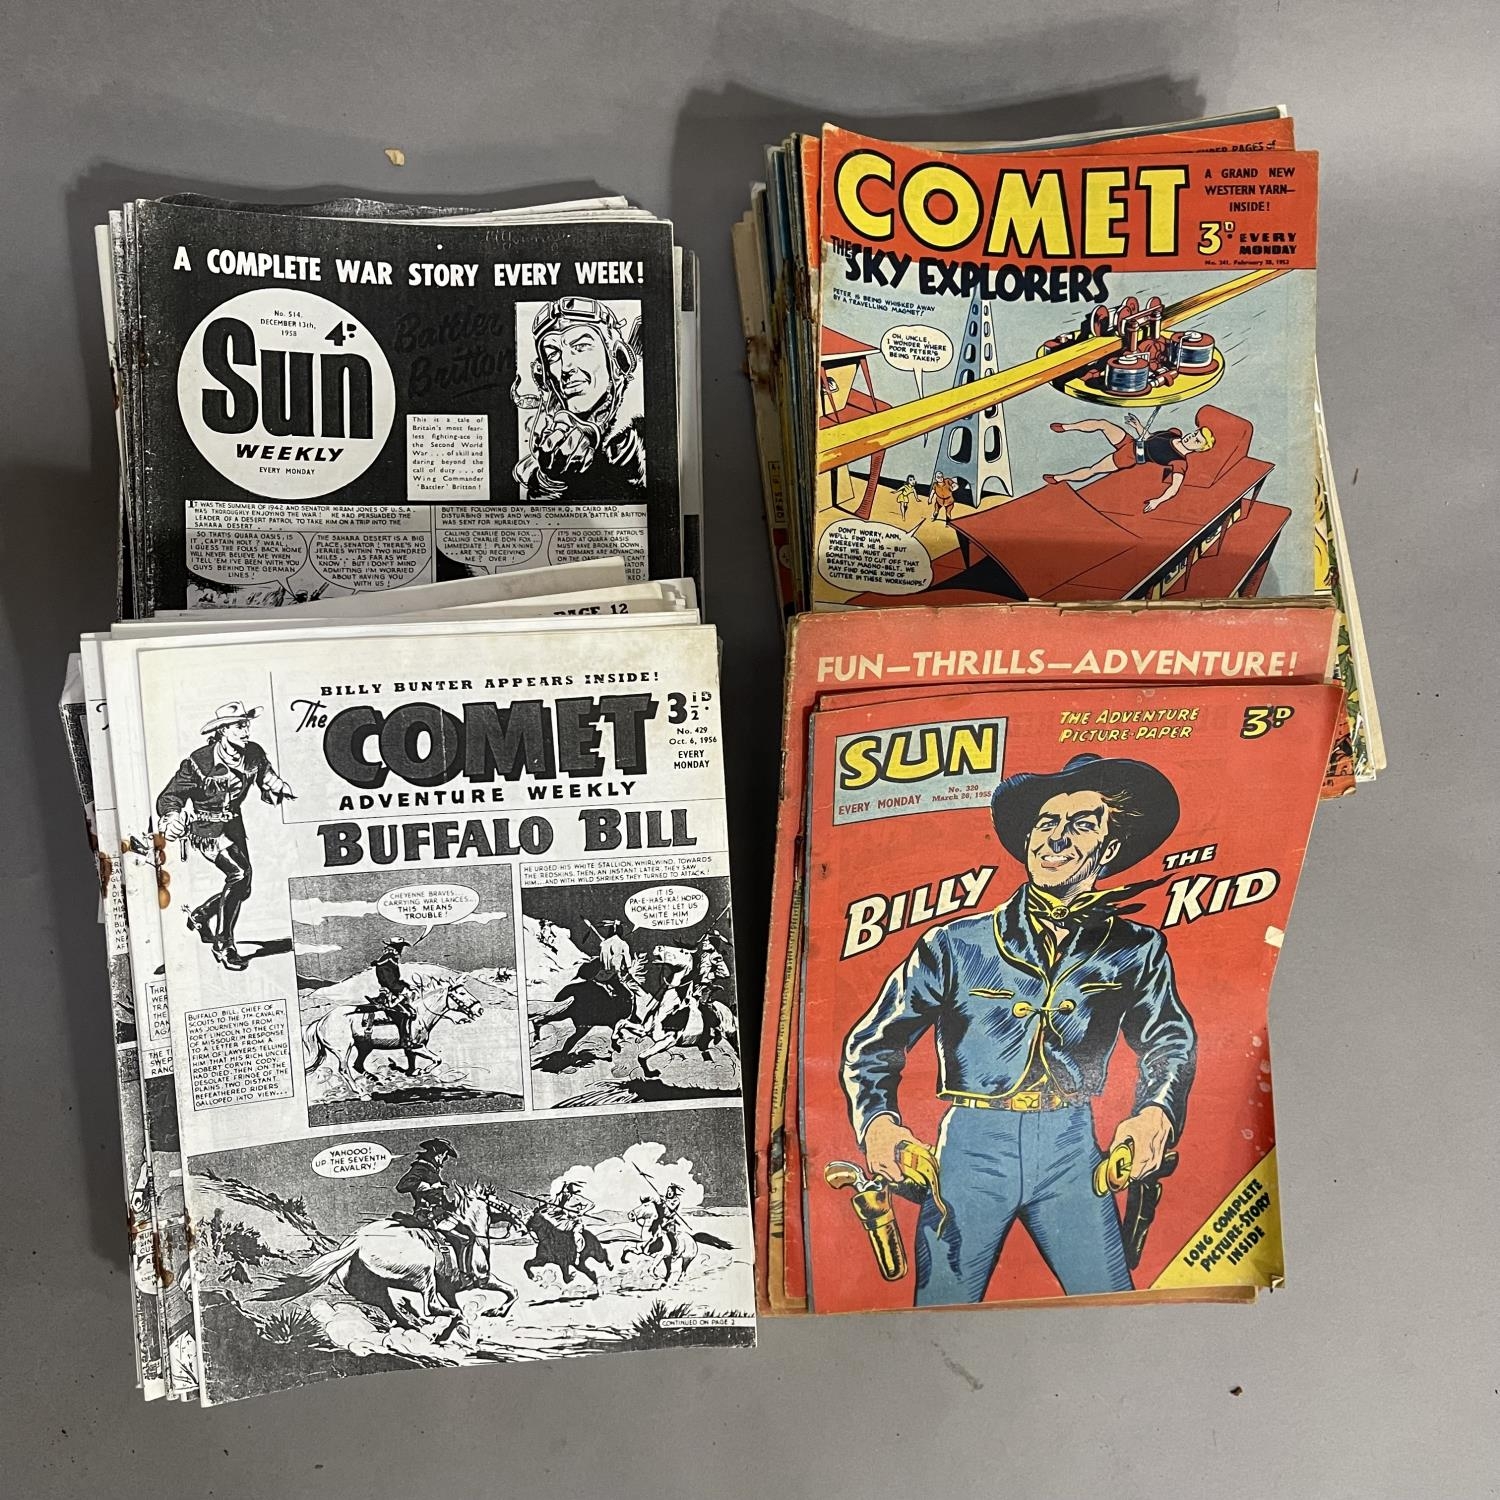 A collection of comics from the early to late 1950s, comprising 69 issues of The Comet Adventure